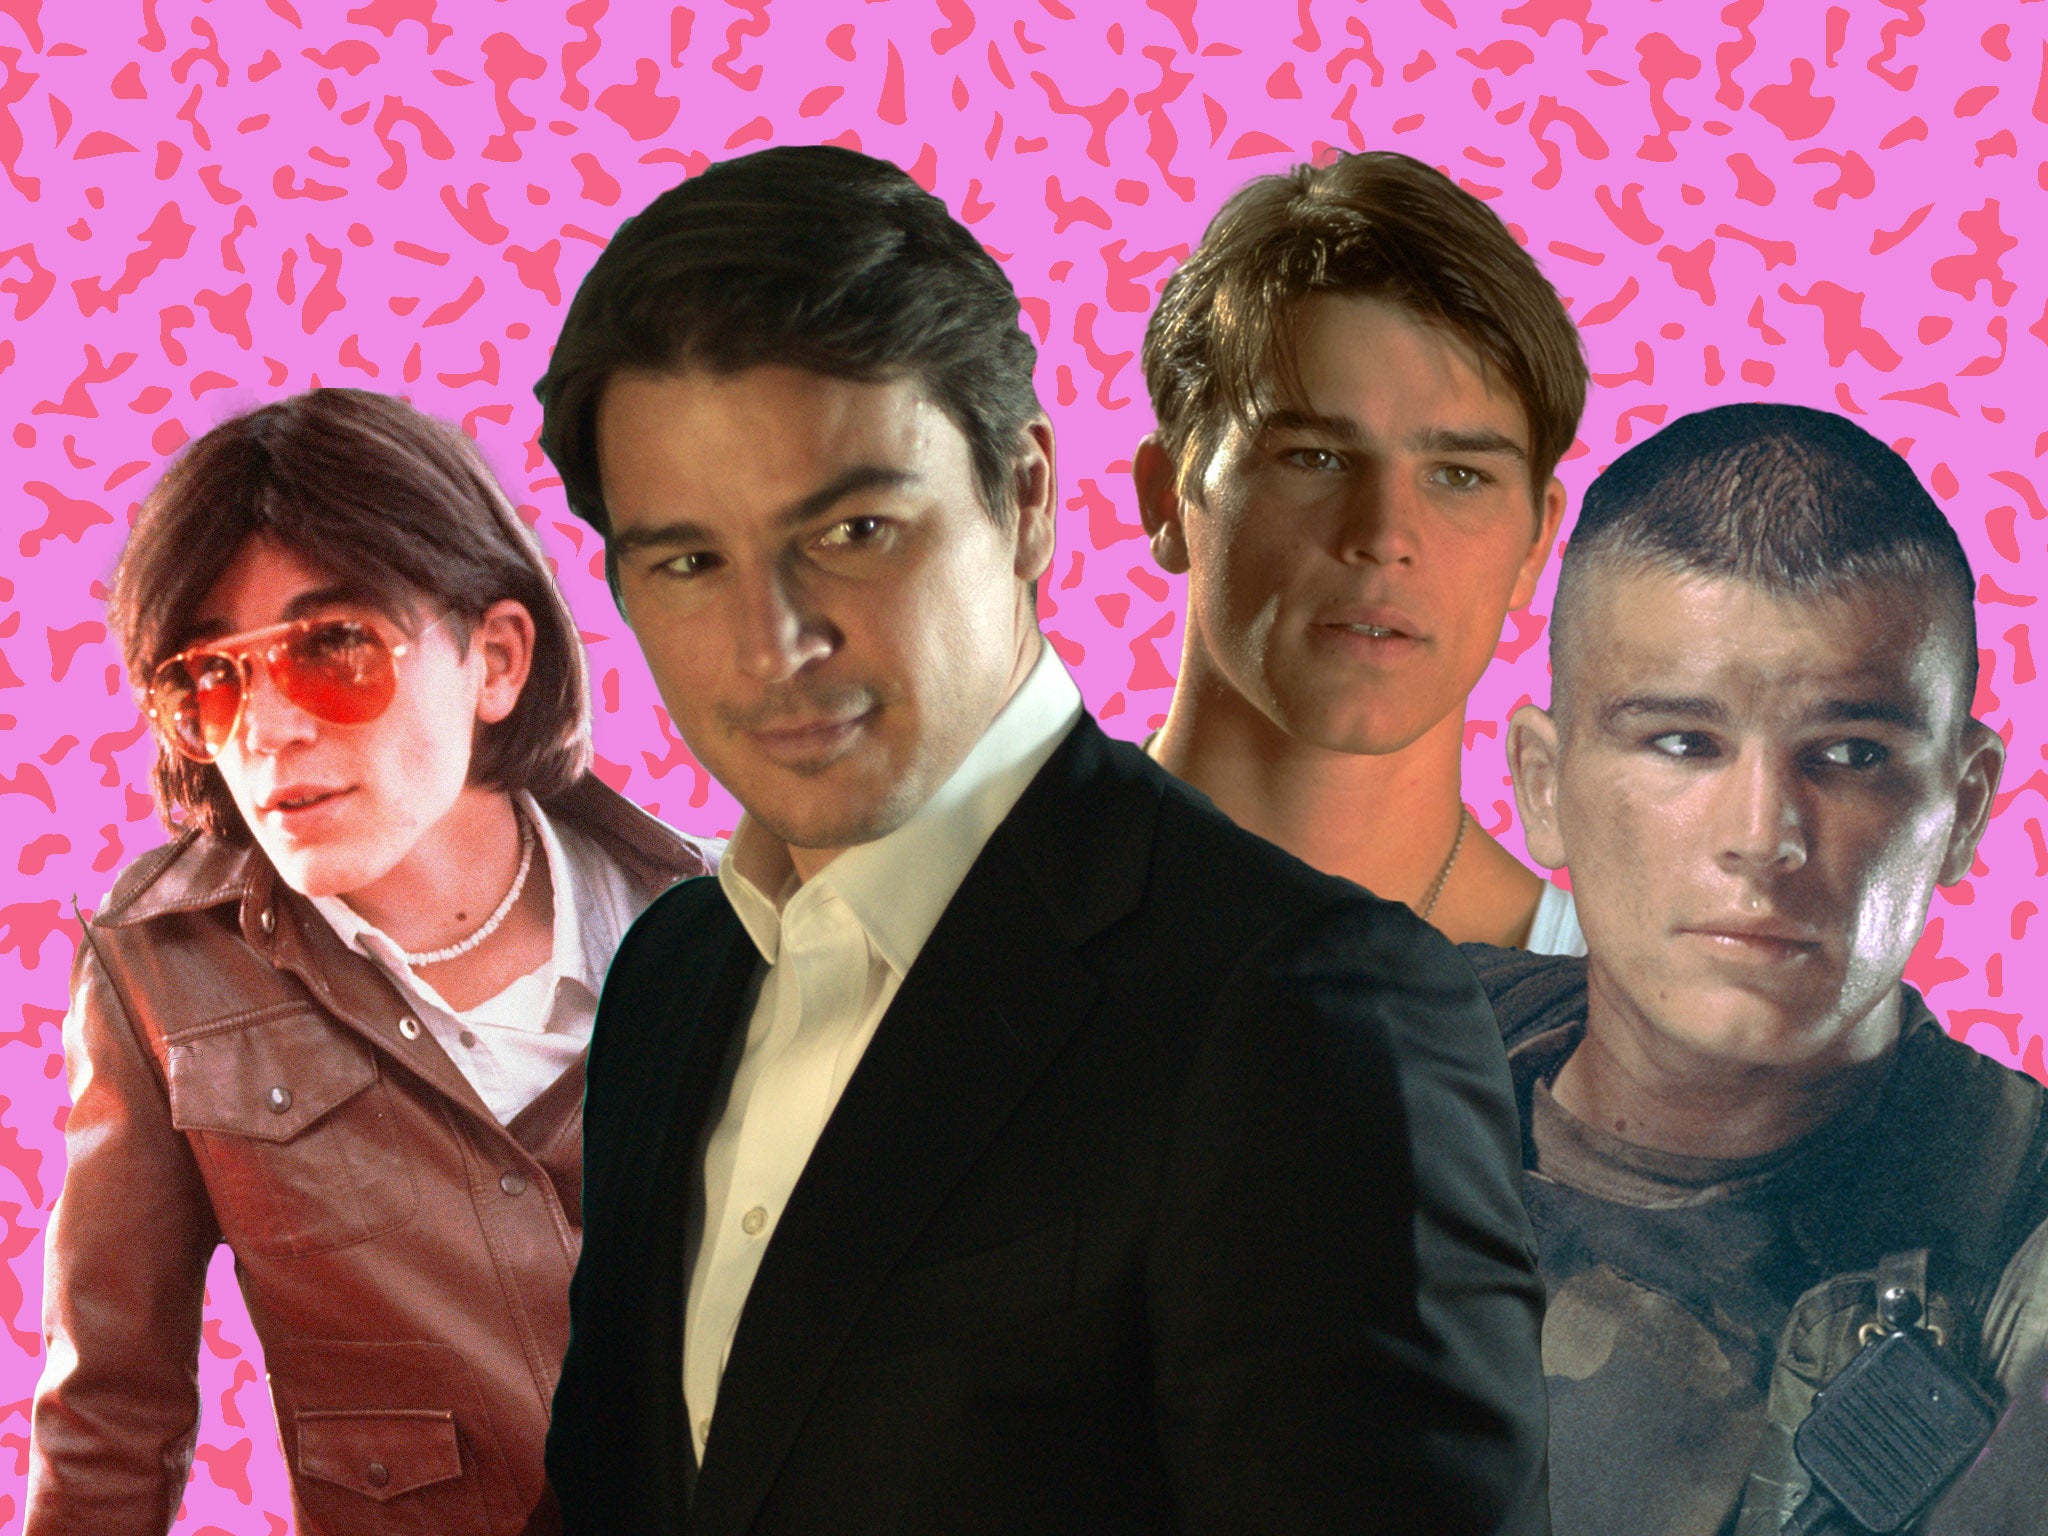 Josh Hartnett in ‘The Virgin Suicides’, ‘The Fear Index’, ‘Pearl Harbor’ and ‘Black Hawk Down'